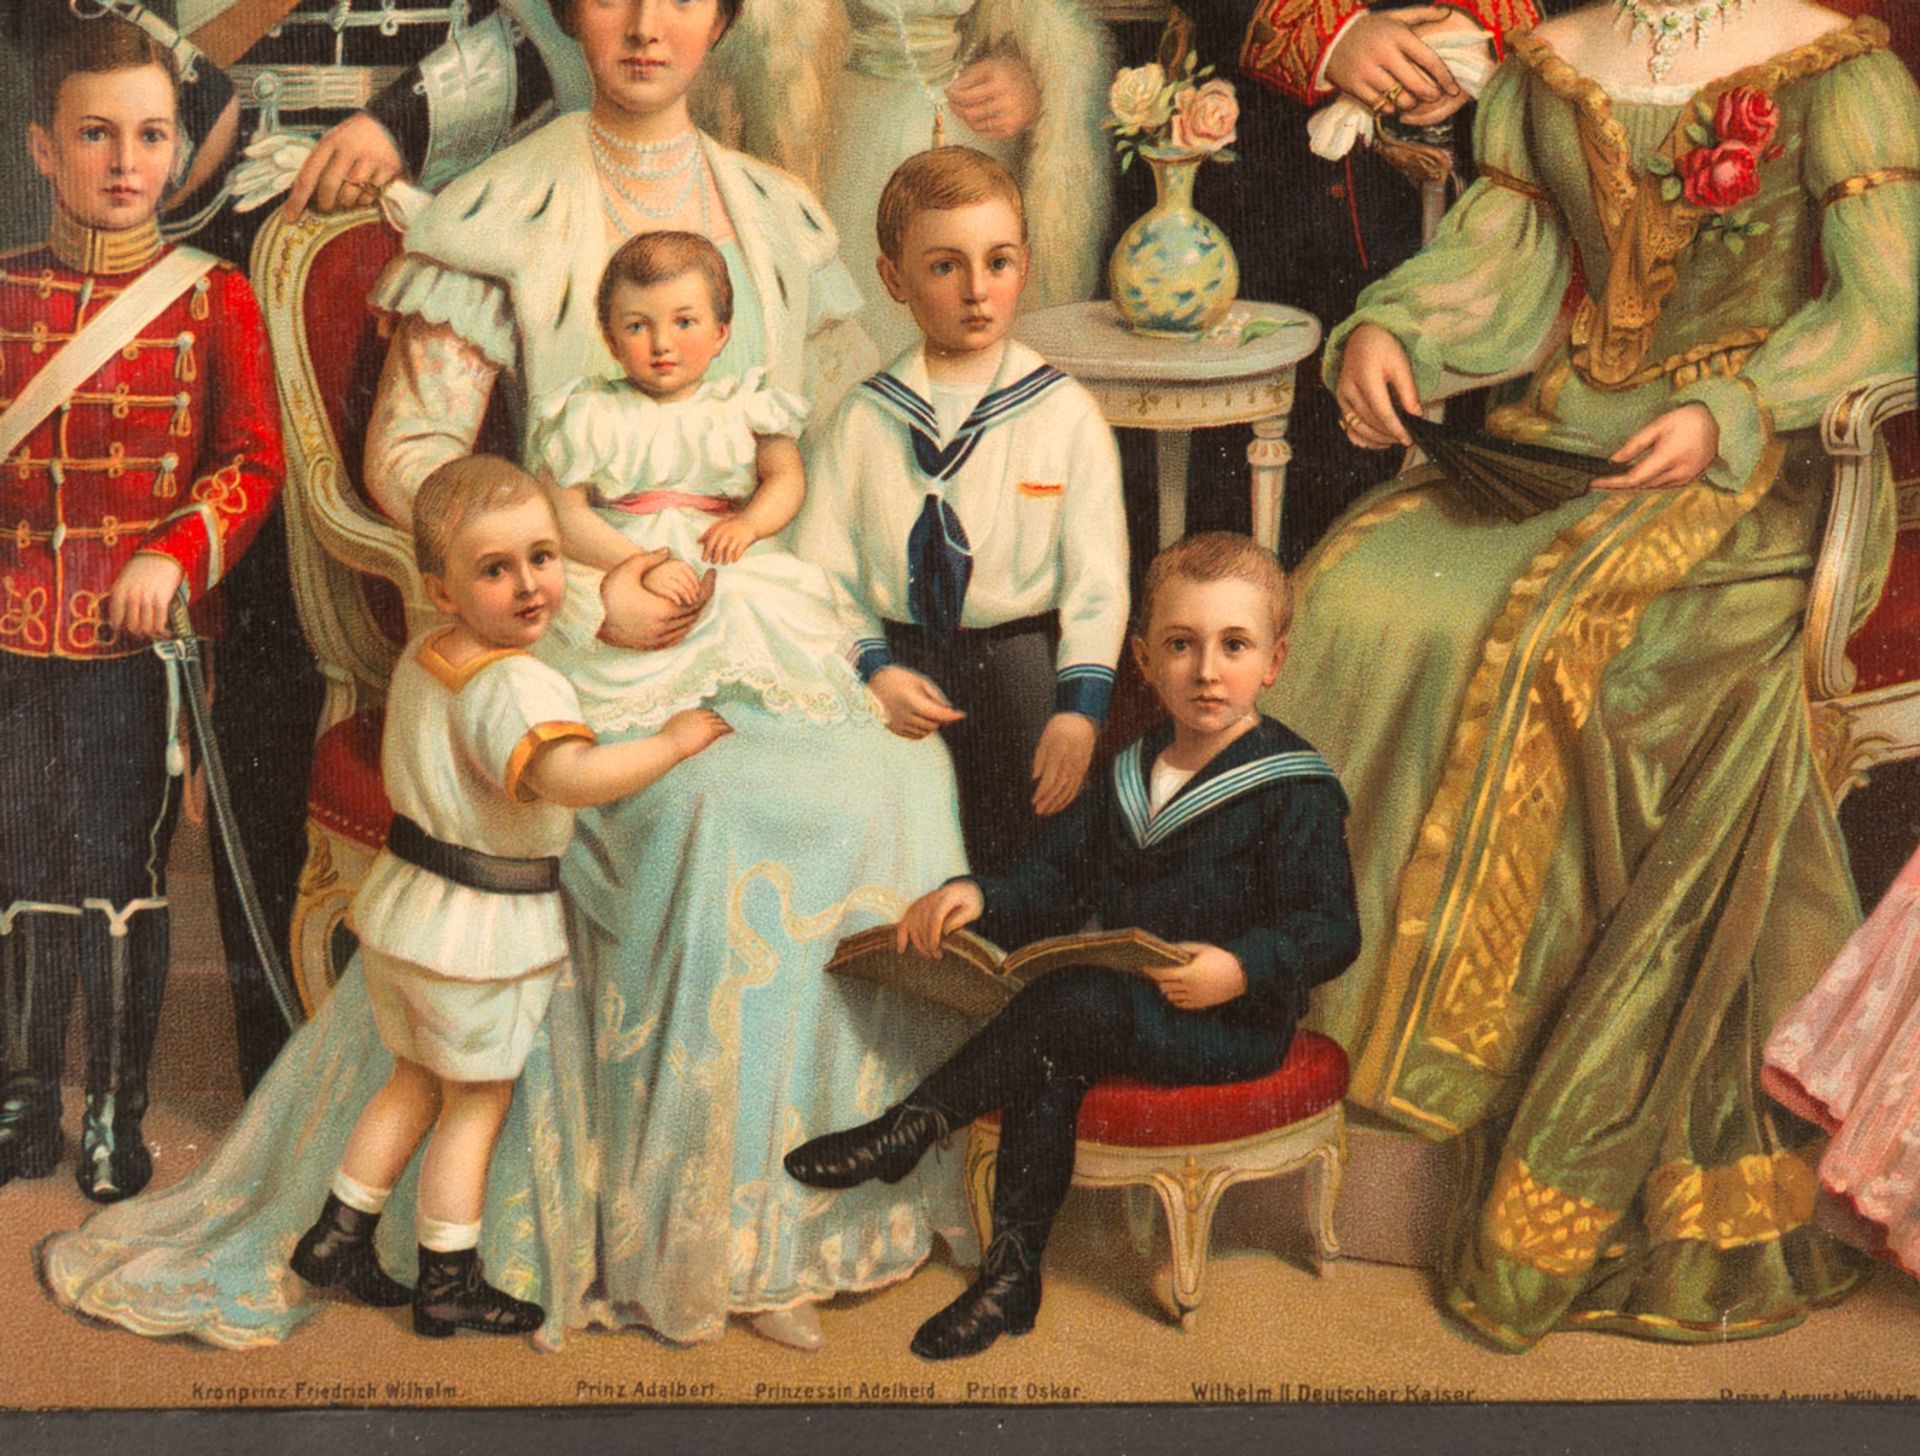 German imperial family - Image 2 of 2